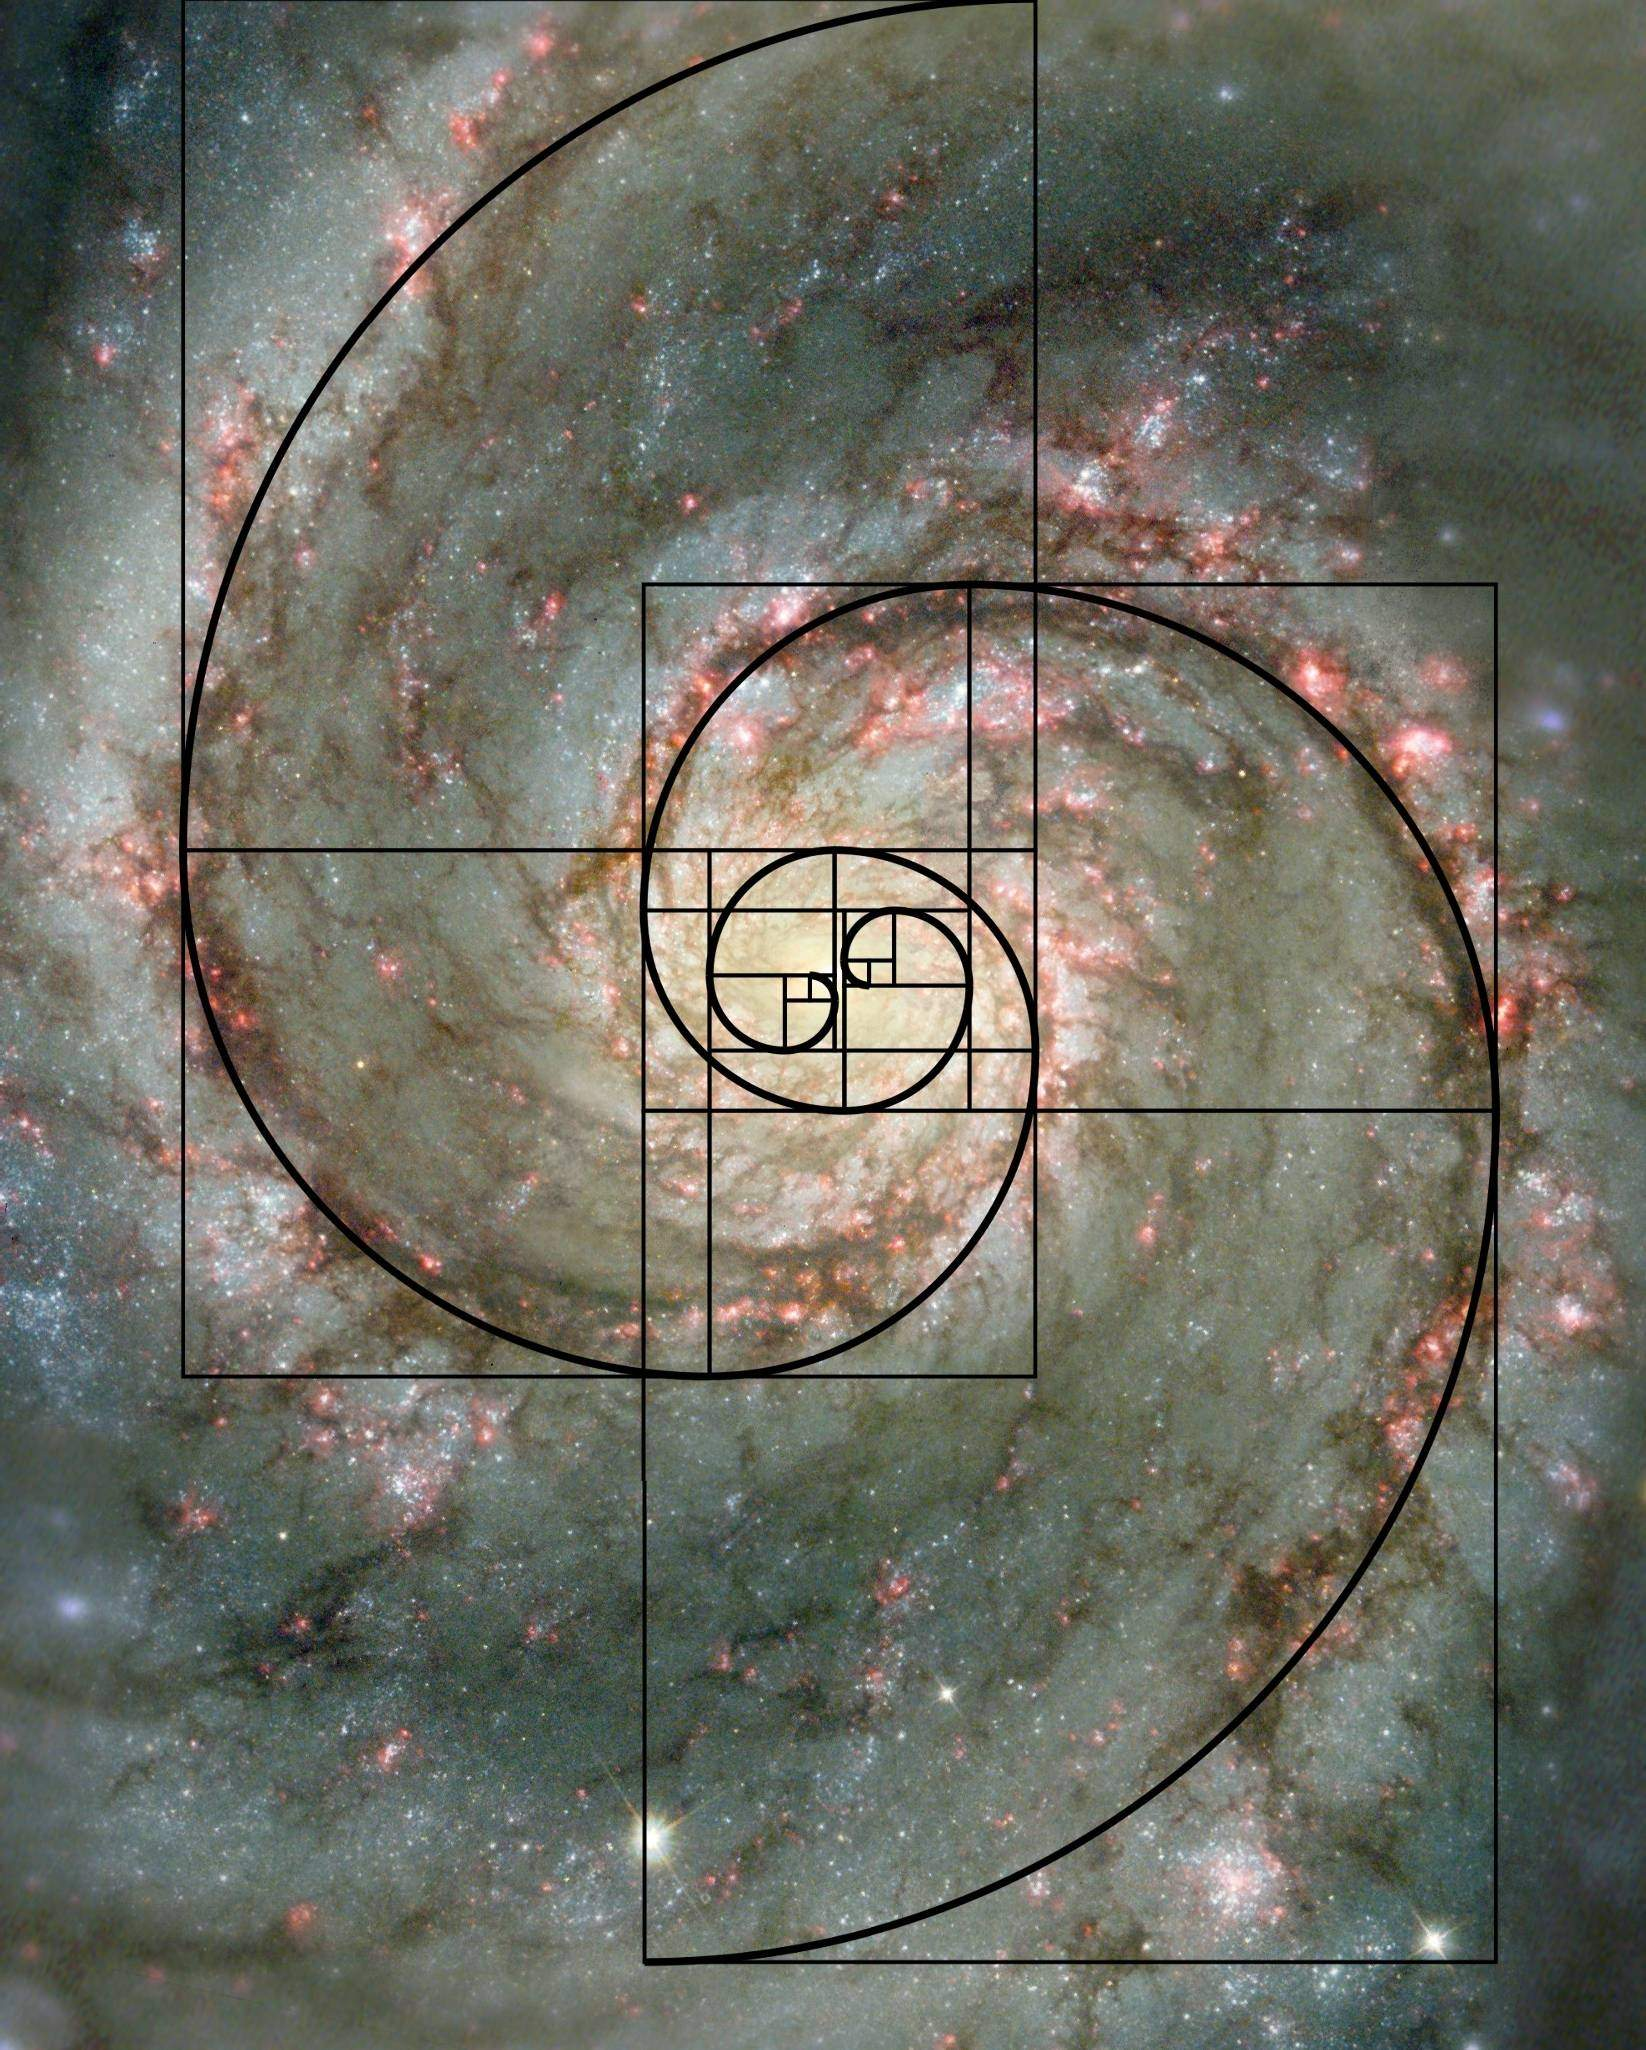 The Fibonacci numbers and the golden ratio appear naturally in science and your everyday life. This spiral galaxy has the shape of the golden spiral and is just one out of many examples where the golden ratio occurs.